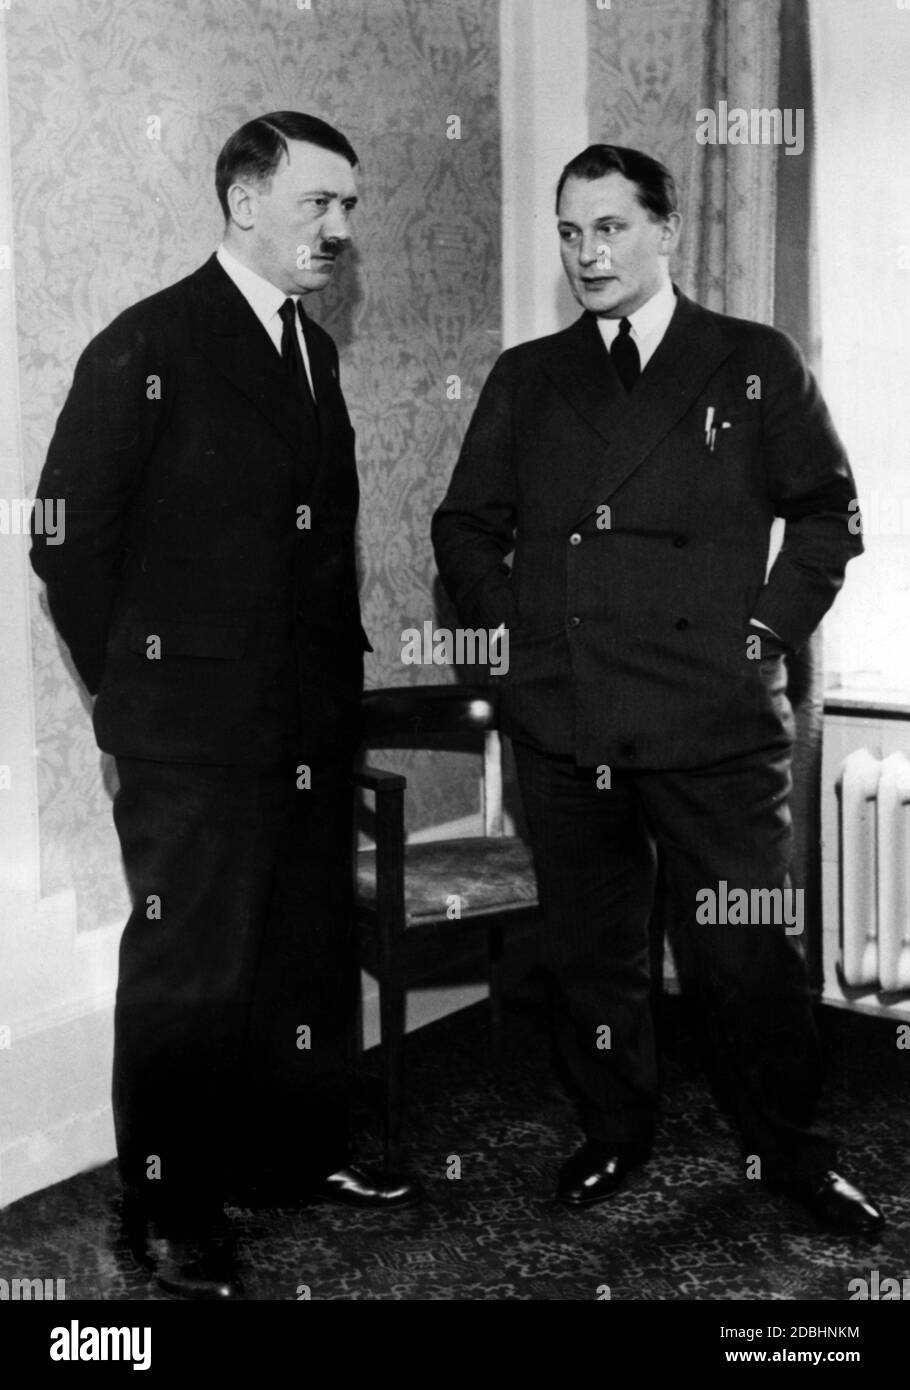 Adolf Hitler, together with Hermann Goering, is expecting a delegation of foreign journalists at the Kaiserhof Hotel in Berlin, who he informed about his foreign policy positions. Stock Photo